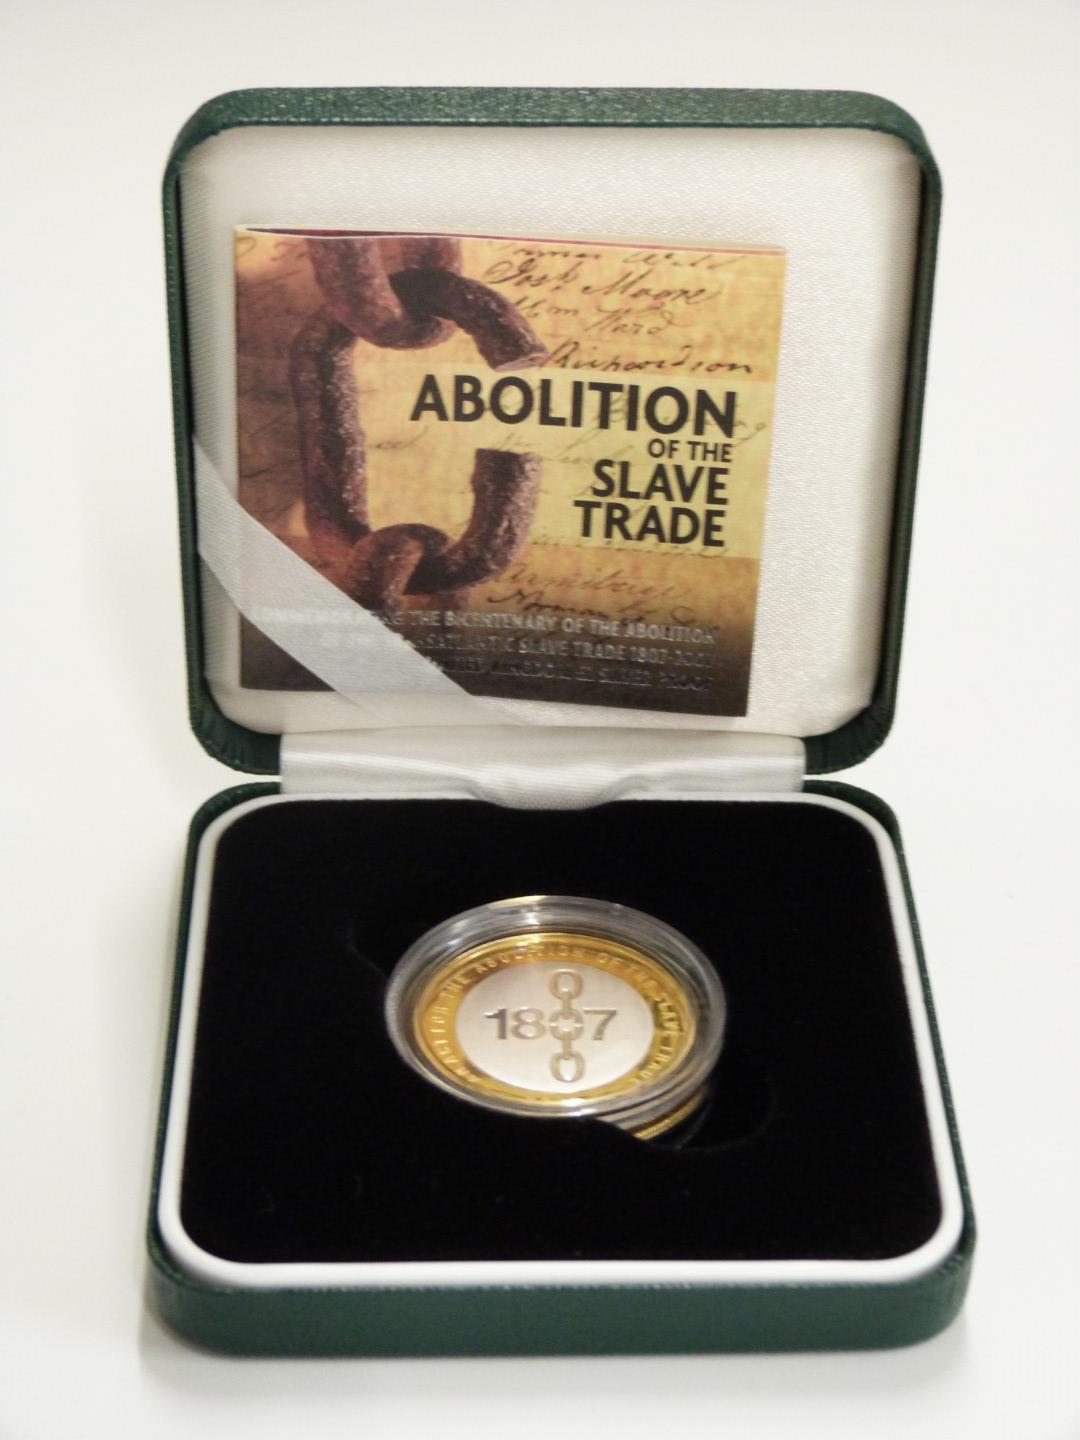 Four Royal Mint silver proof £2 coins for 2007, two Acts of Union and two slavery examples, all - Image 5 of 5